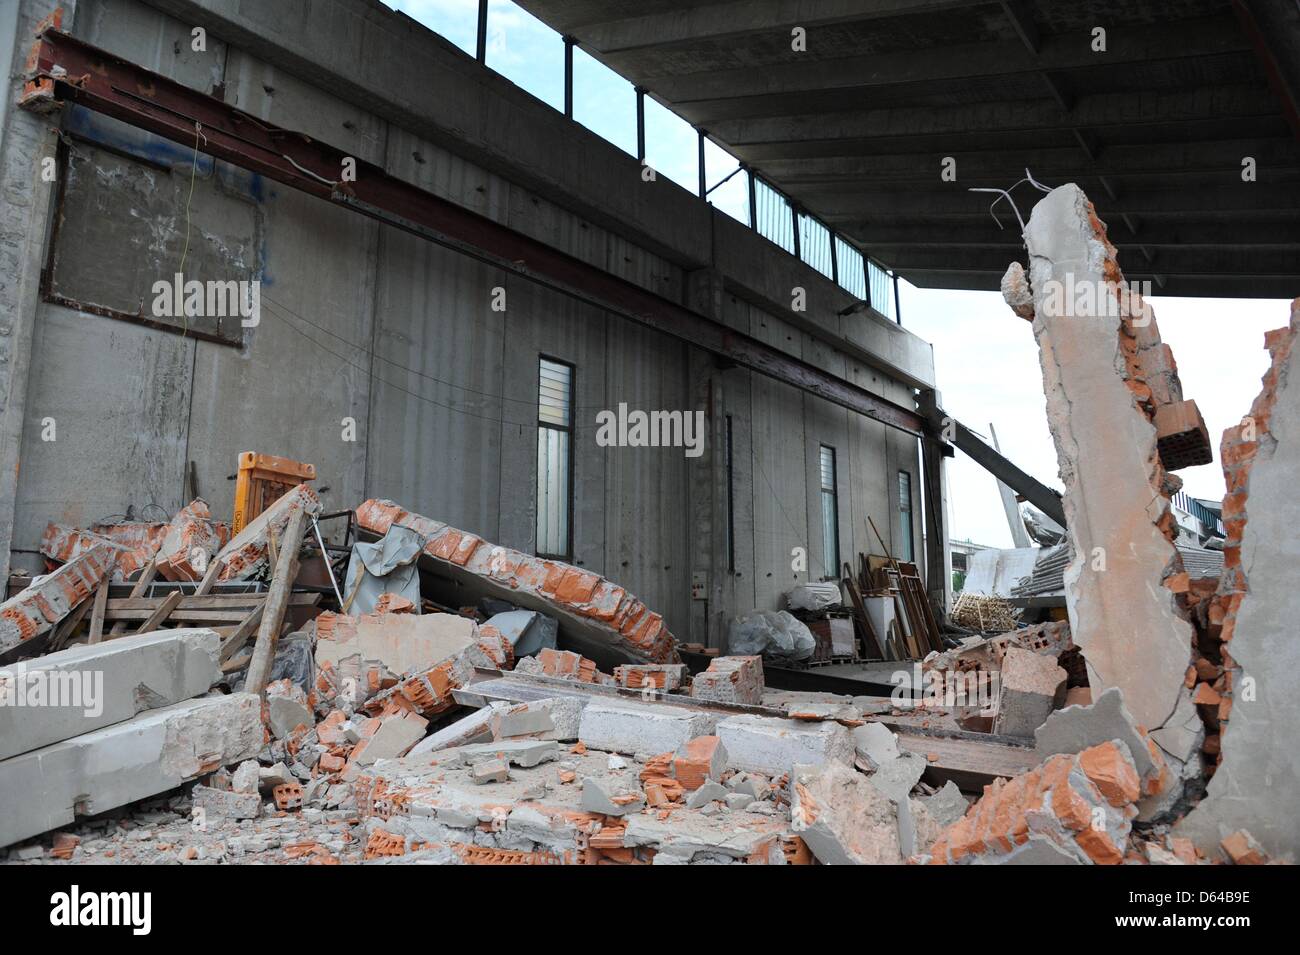 A collapsed hall is pictured in Mirabello, Italy, 23 May 2012. An earthquake measuring 6.0 on the Richter scale shook the Italian region Emilia-Romagna early in the morning on 20 May 2012. Photo: Nicolas Armer Stock Photo